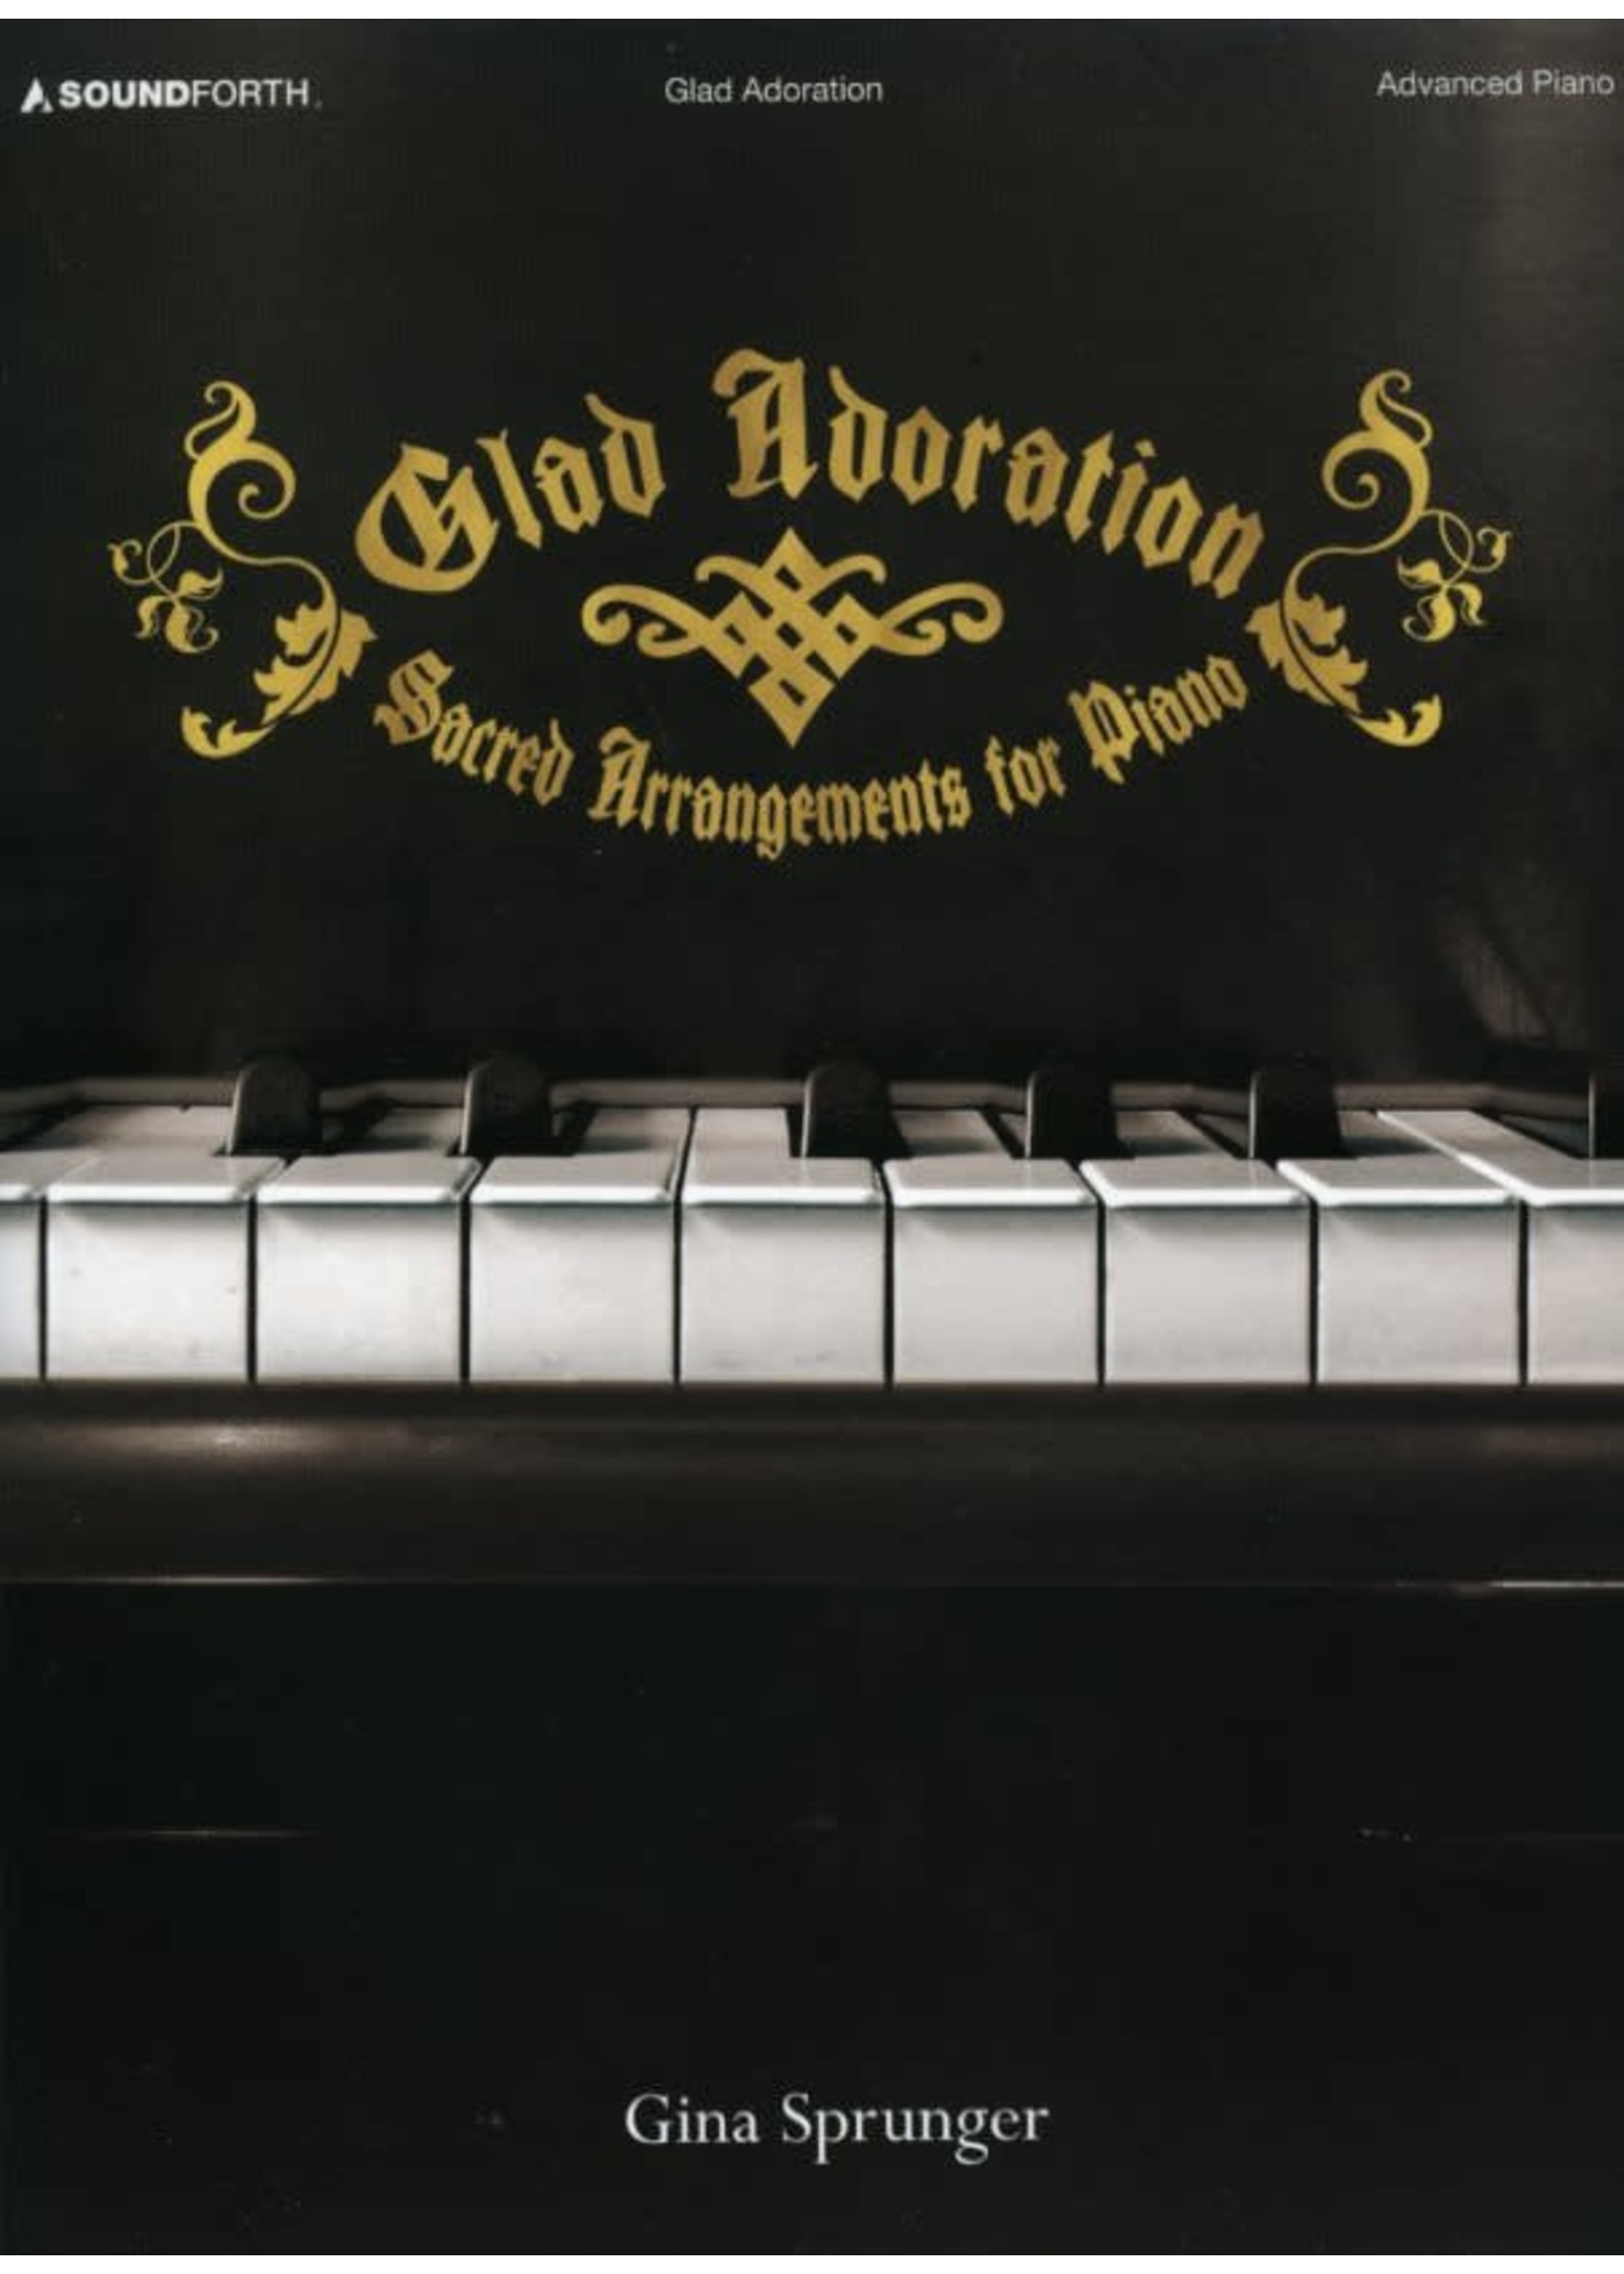 Glad Adoration (Sprunger)-Piano Coll